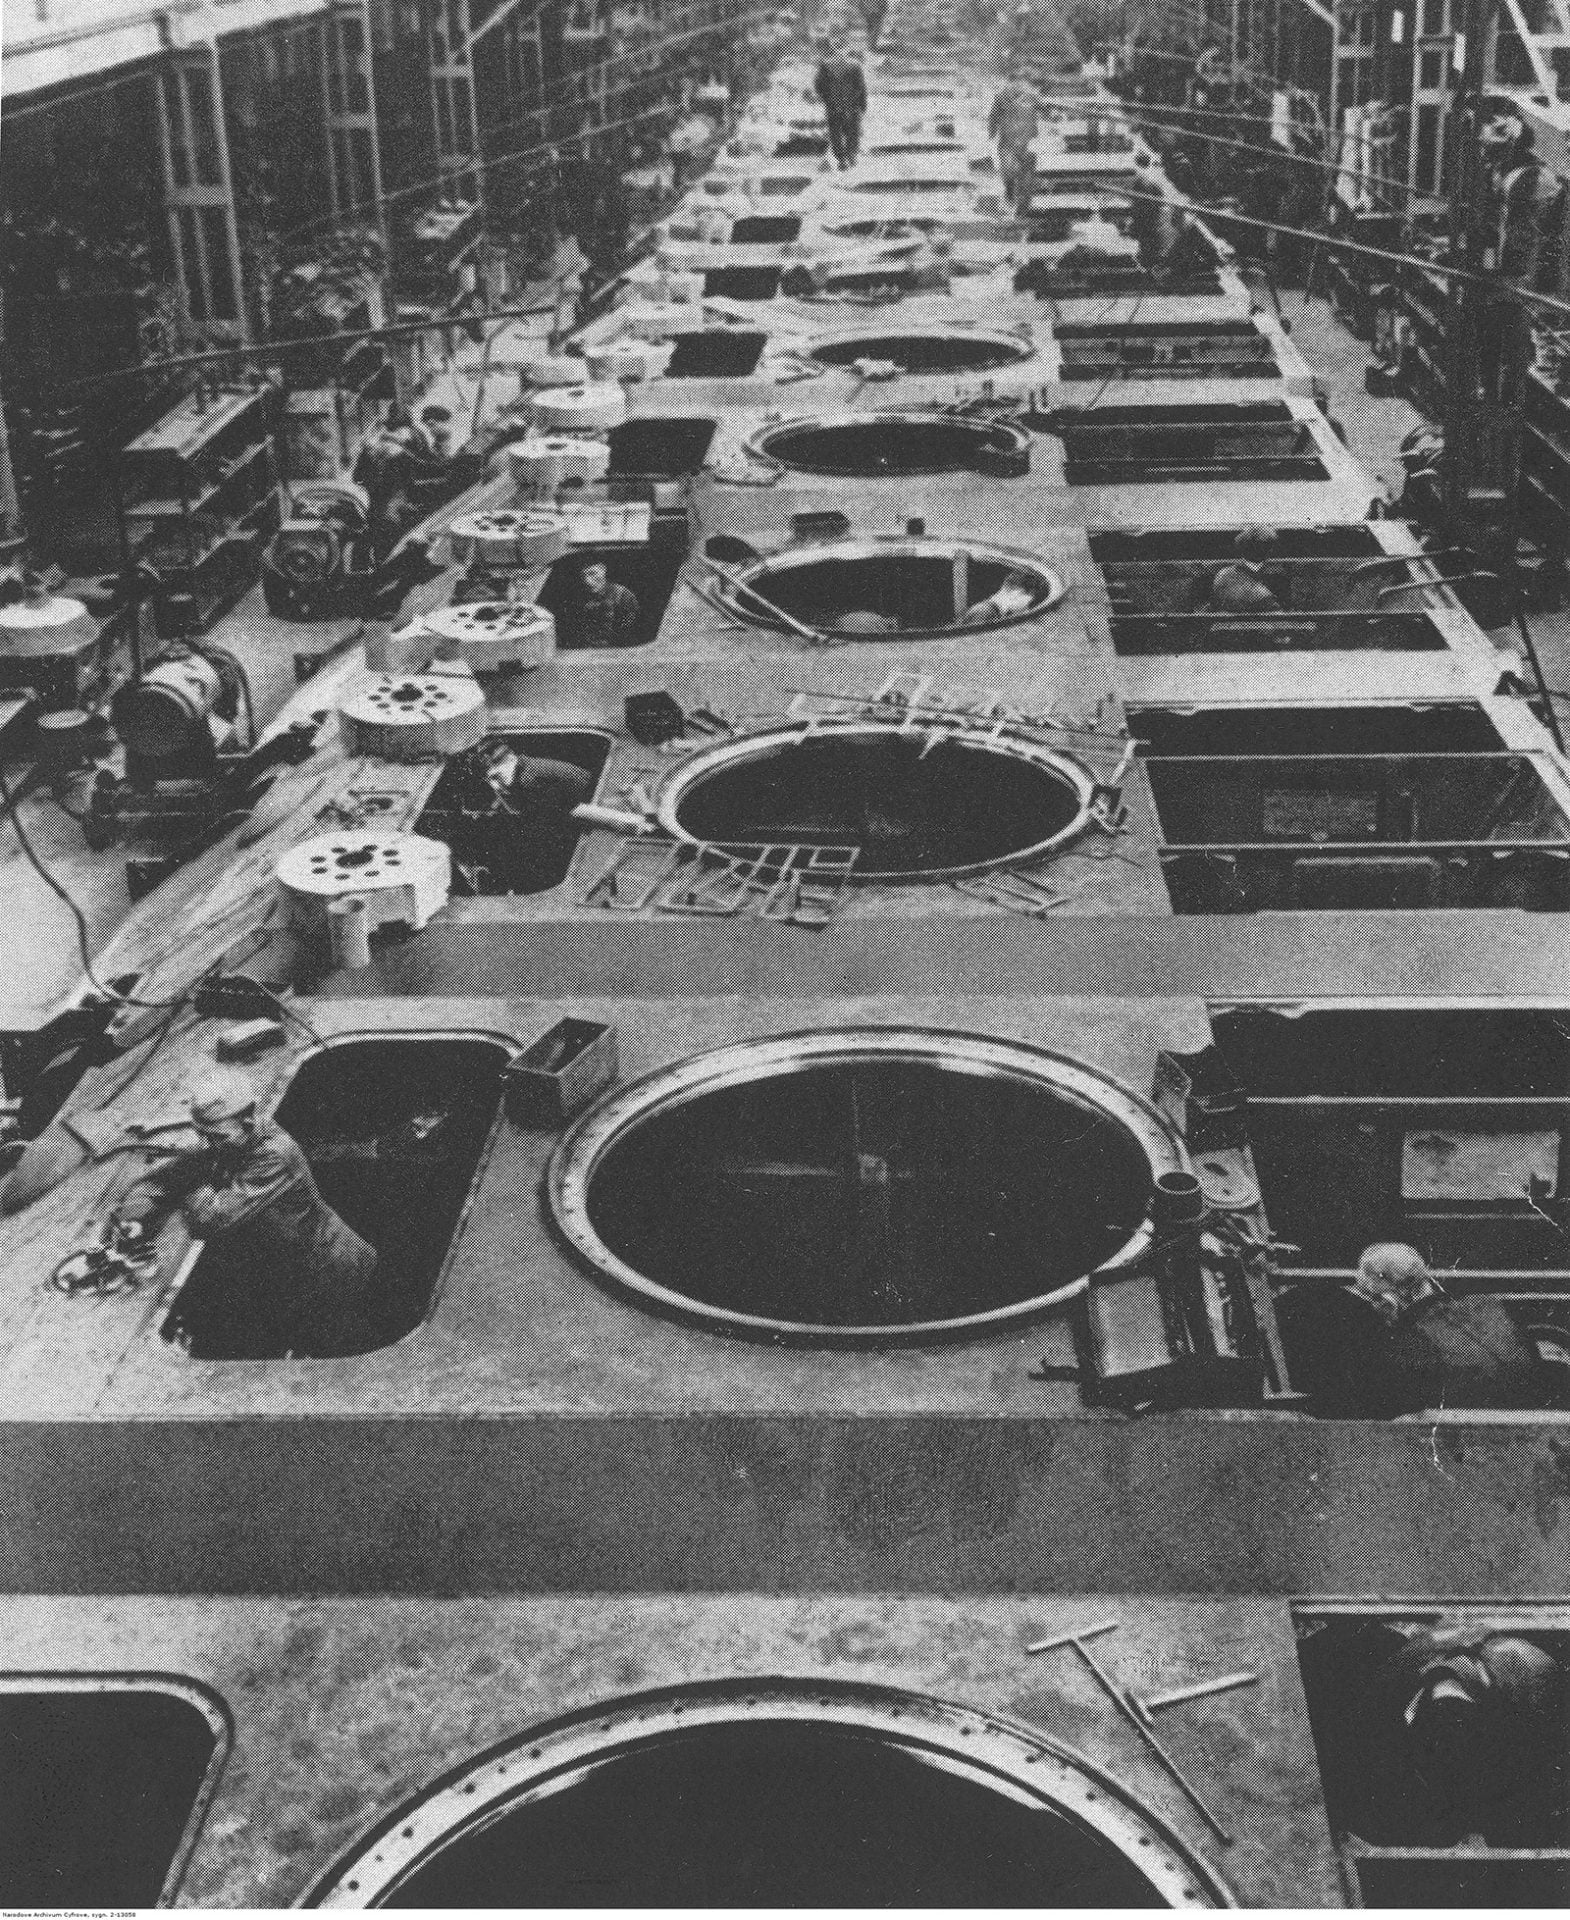 Top view of the assembly hall of the German tanks PzKpfw V Sd Kfz 171 Panther tanks, in September, 1944. Location unknown.